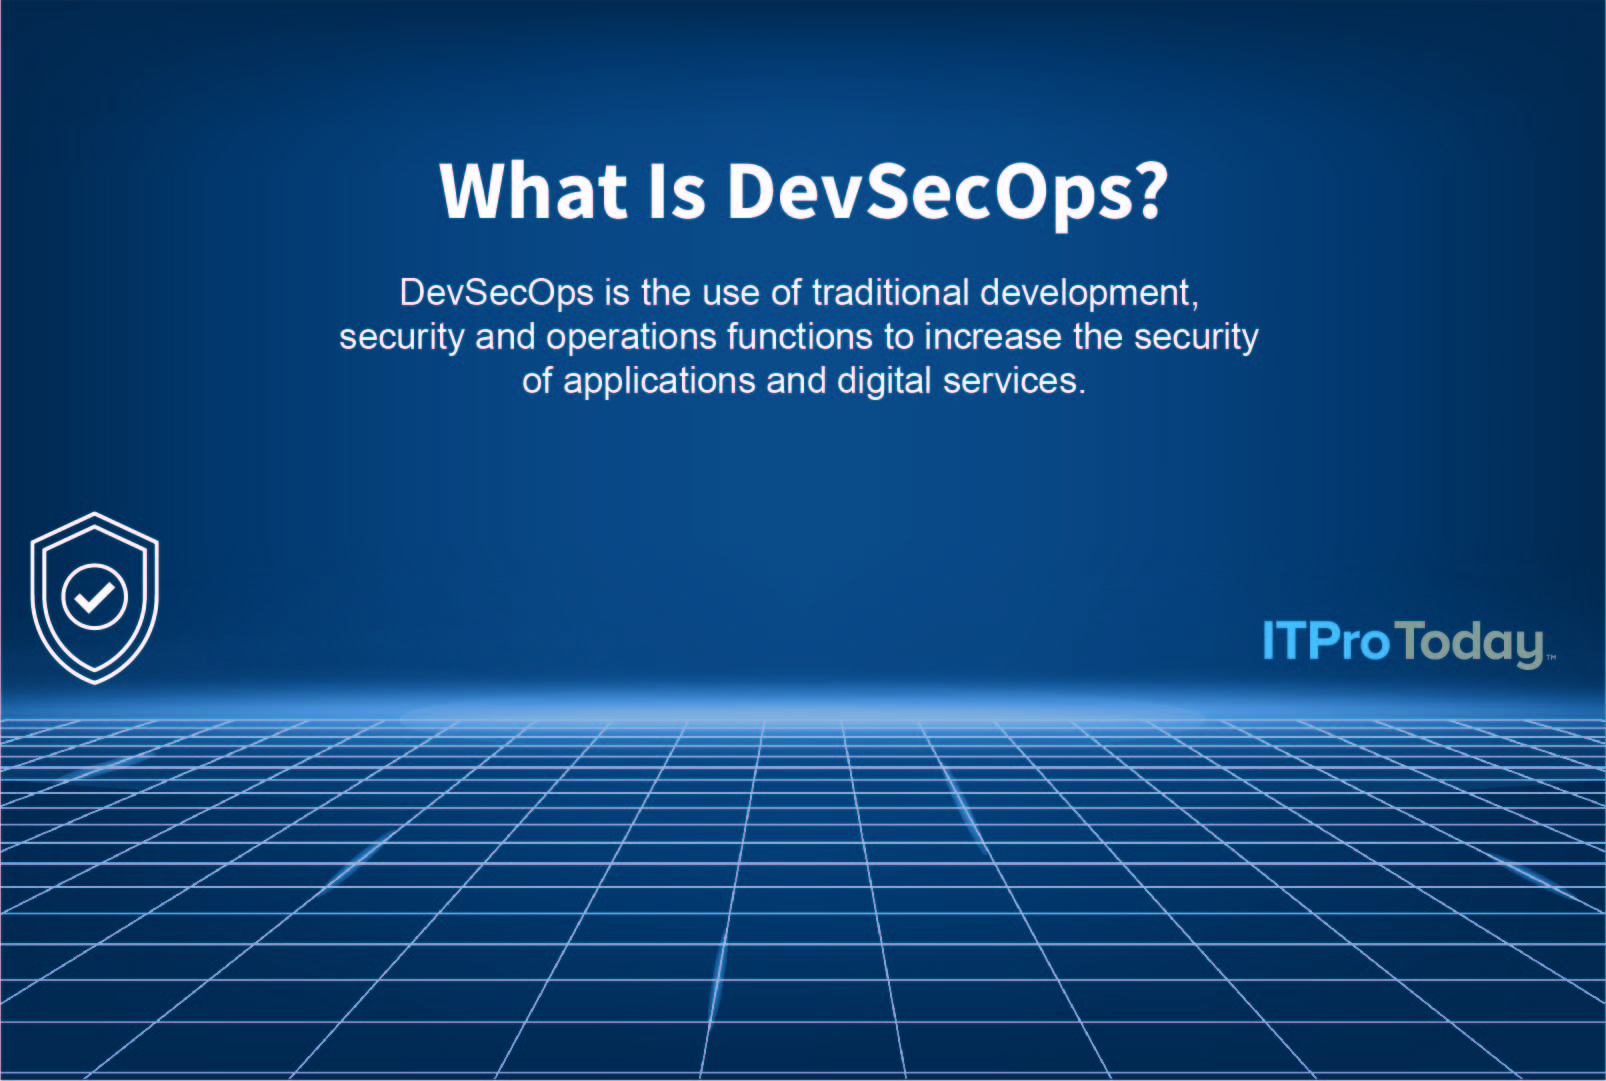 DevSecOps definition provided by ITPro Today